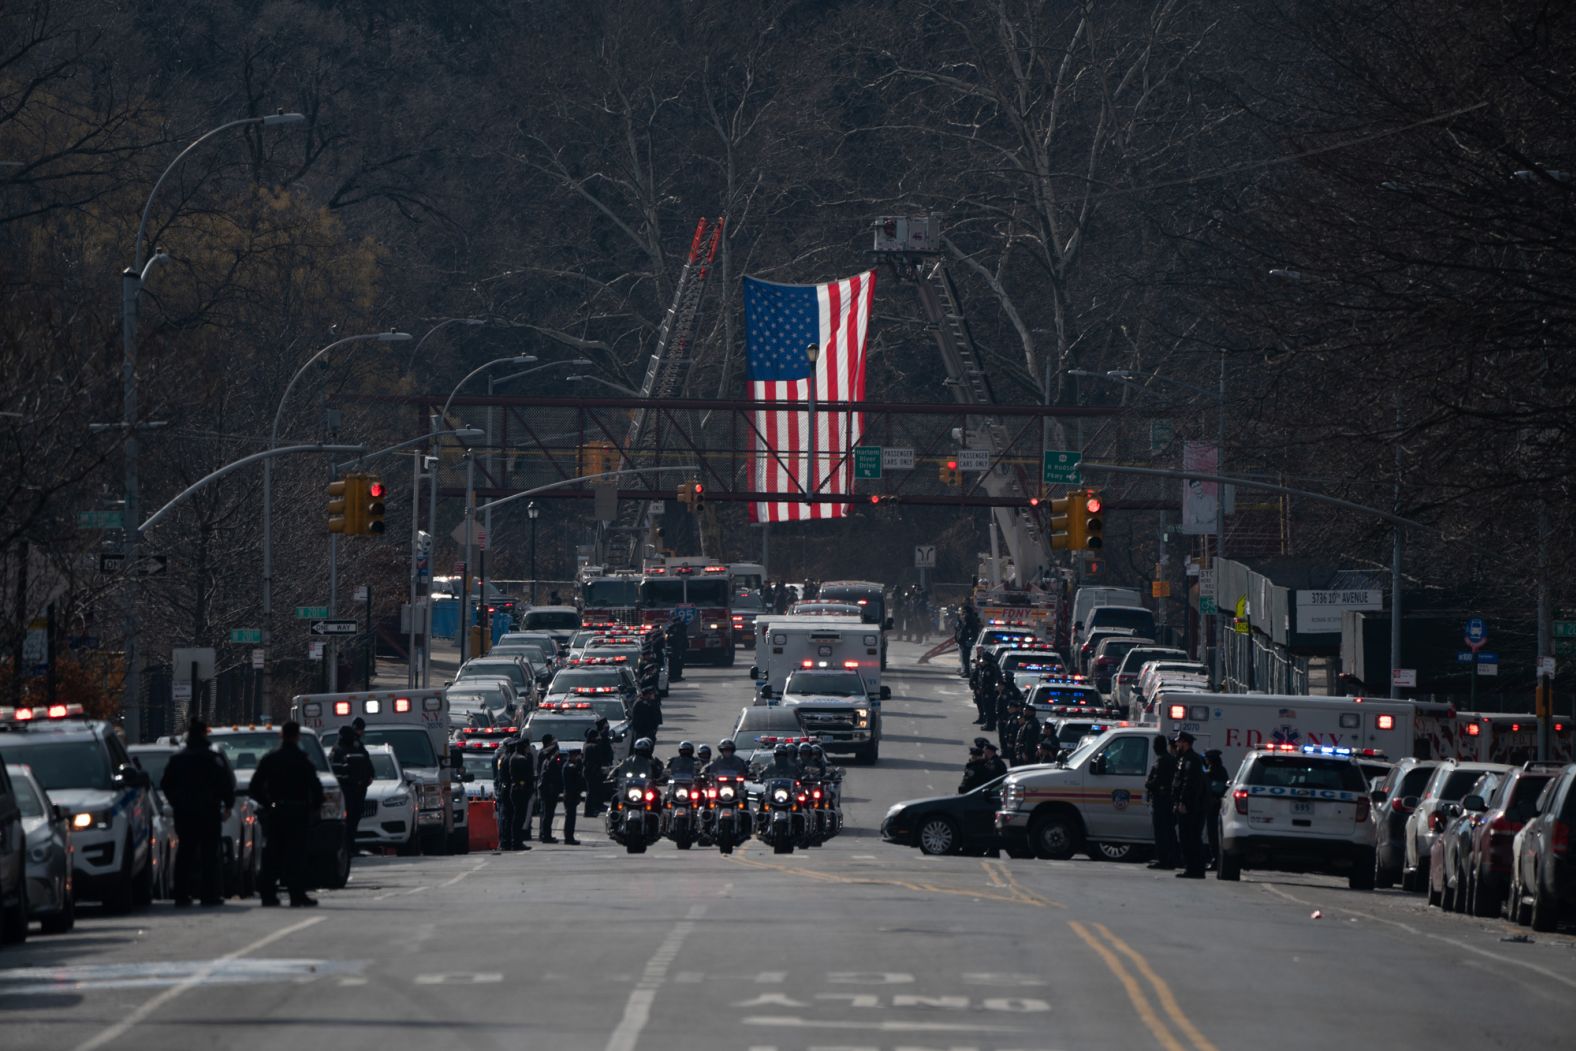 A procession for Rivera's remains makes its way to his funeral.